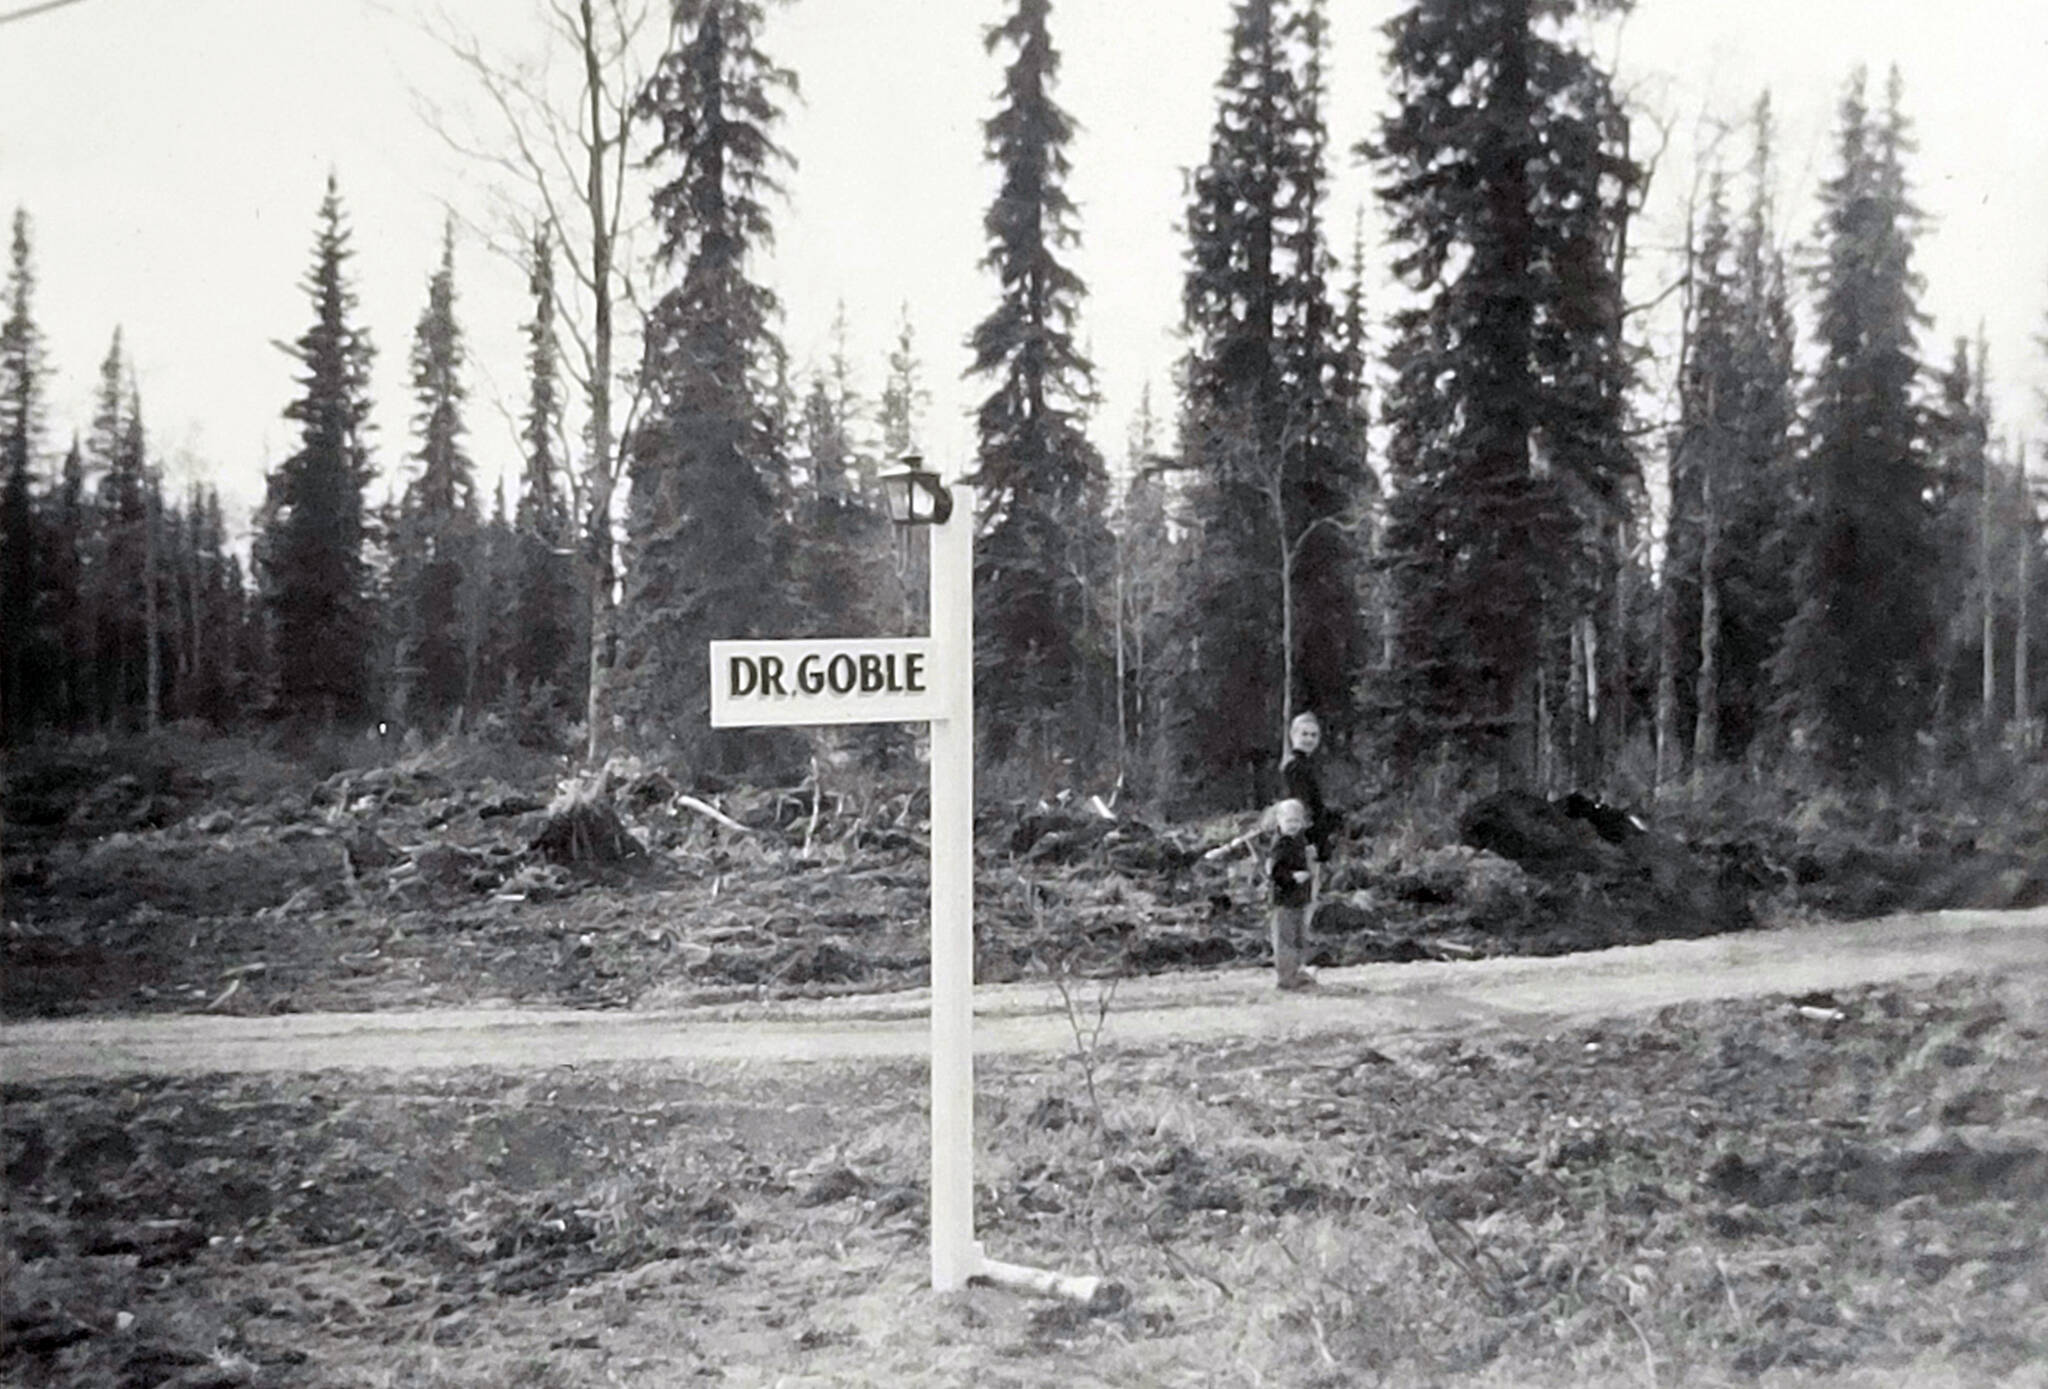 Near Dr. Goble’s clinic, Marian and Grace Goble walk down an early version of McCollum Drive in Kenai, circa 1959-60. (Photo courtesy of Ben and Marian Goble)